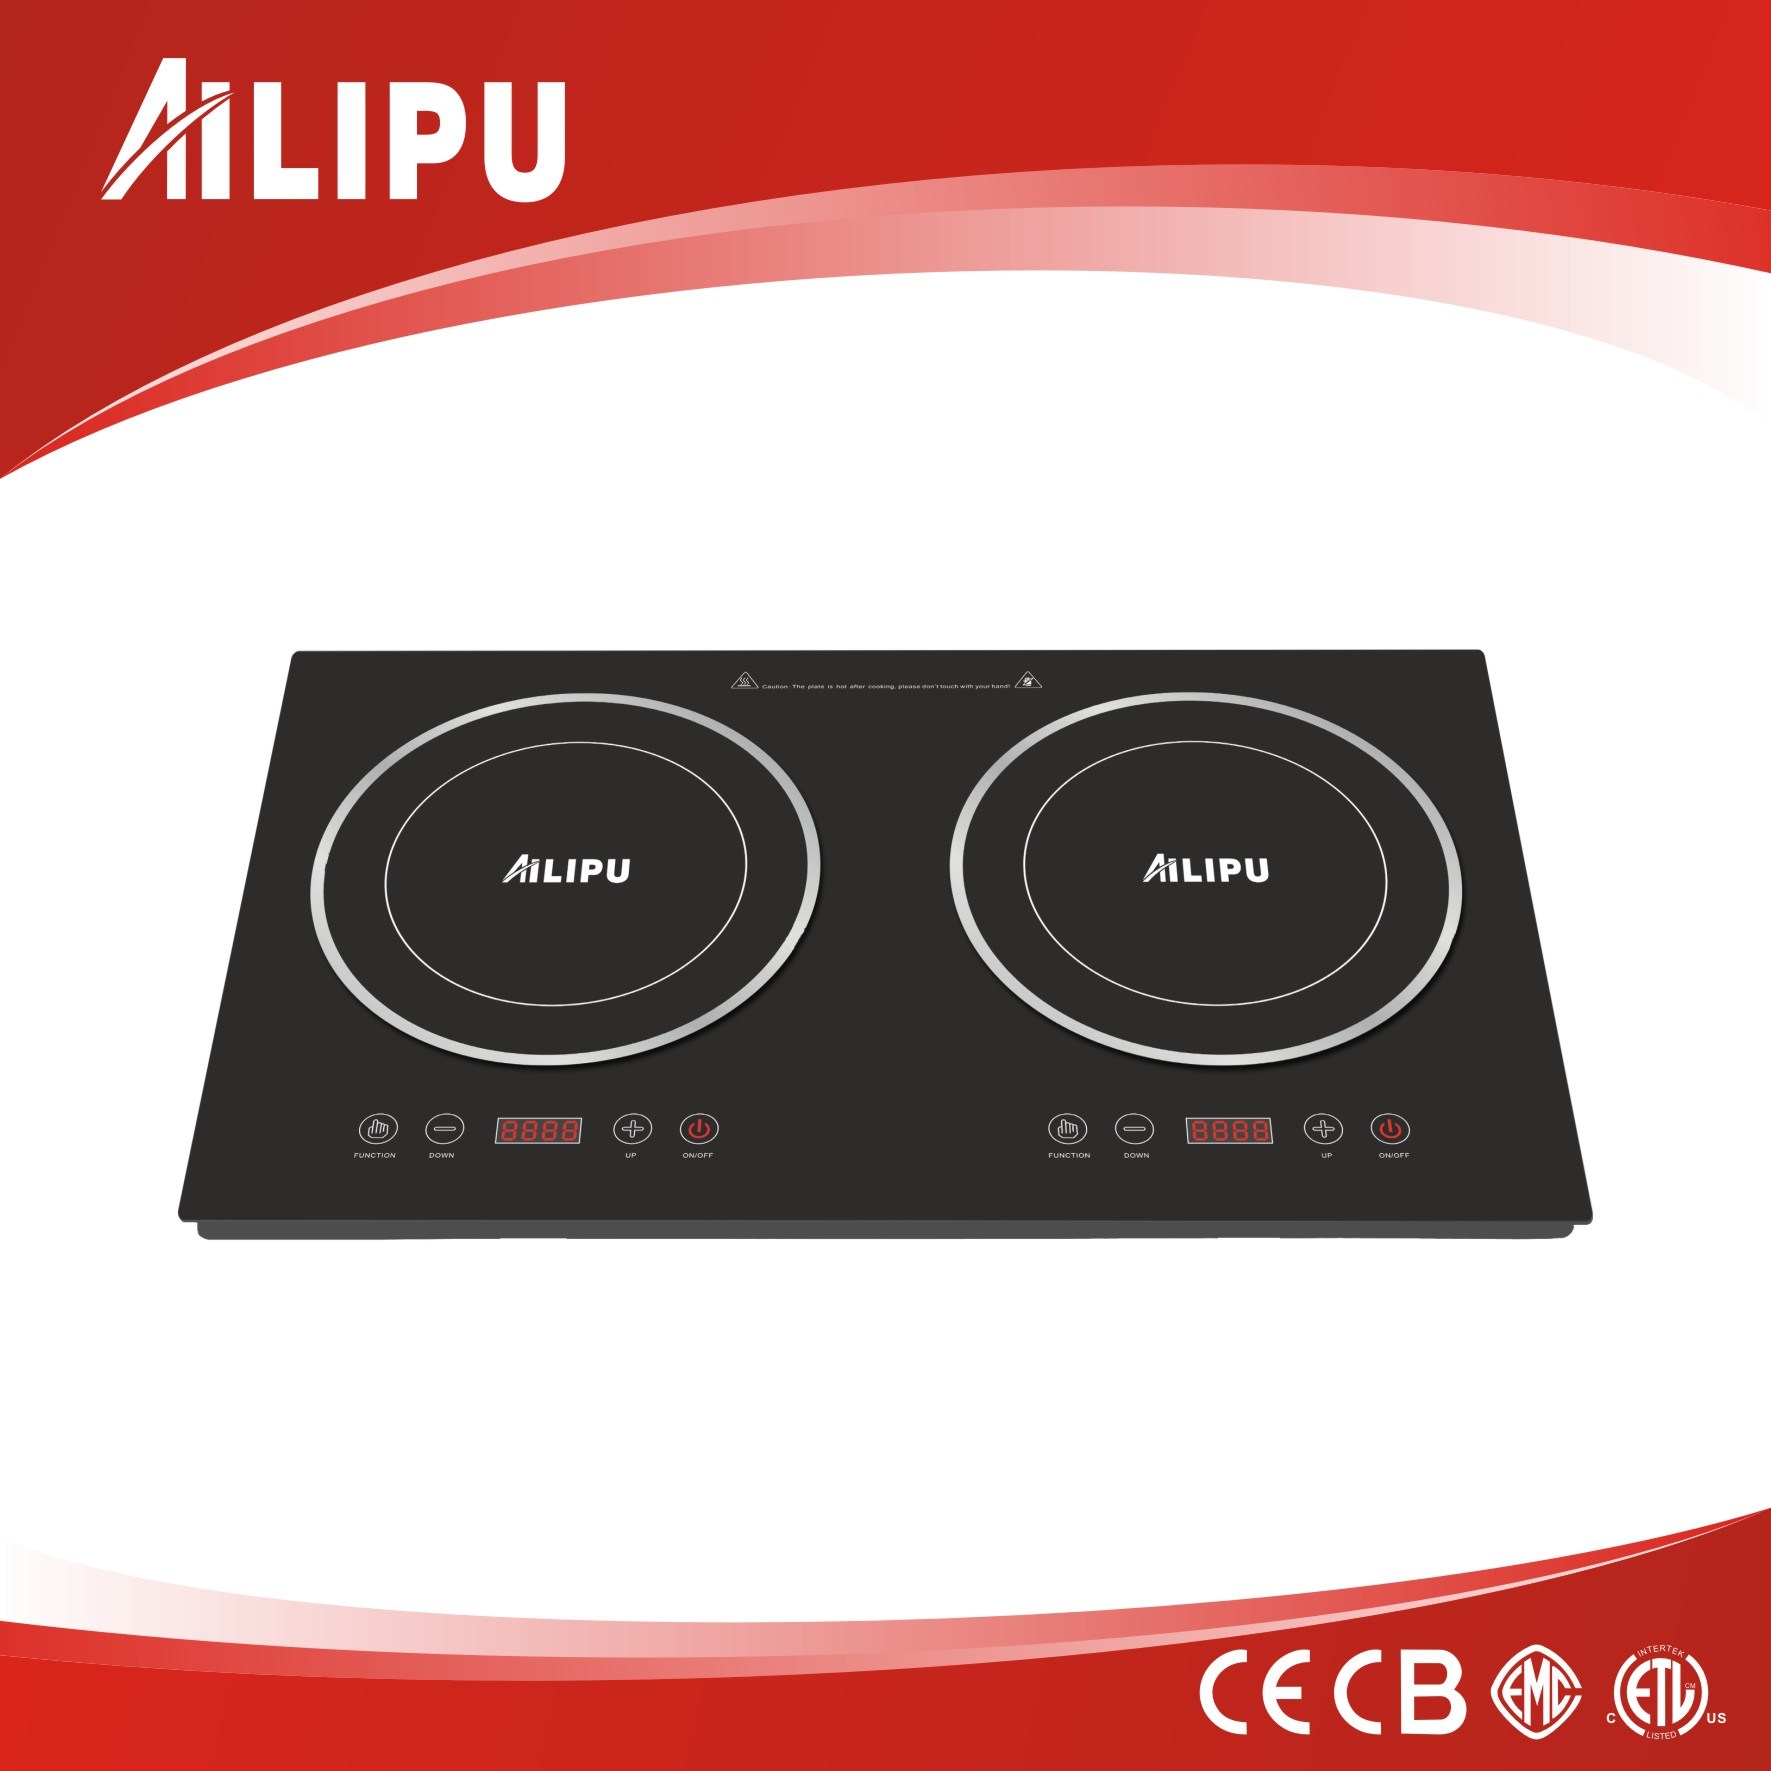 2016 New Design CE CB RoHS EMC Double Induction Hobs/Electric Burners Plate